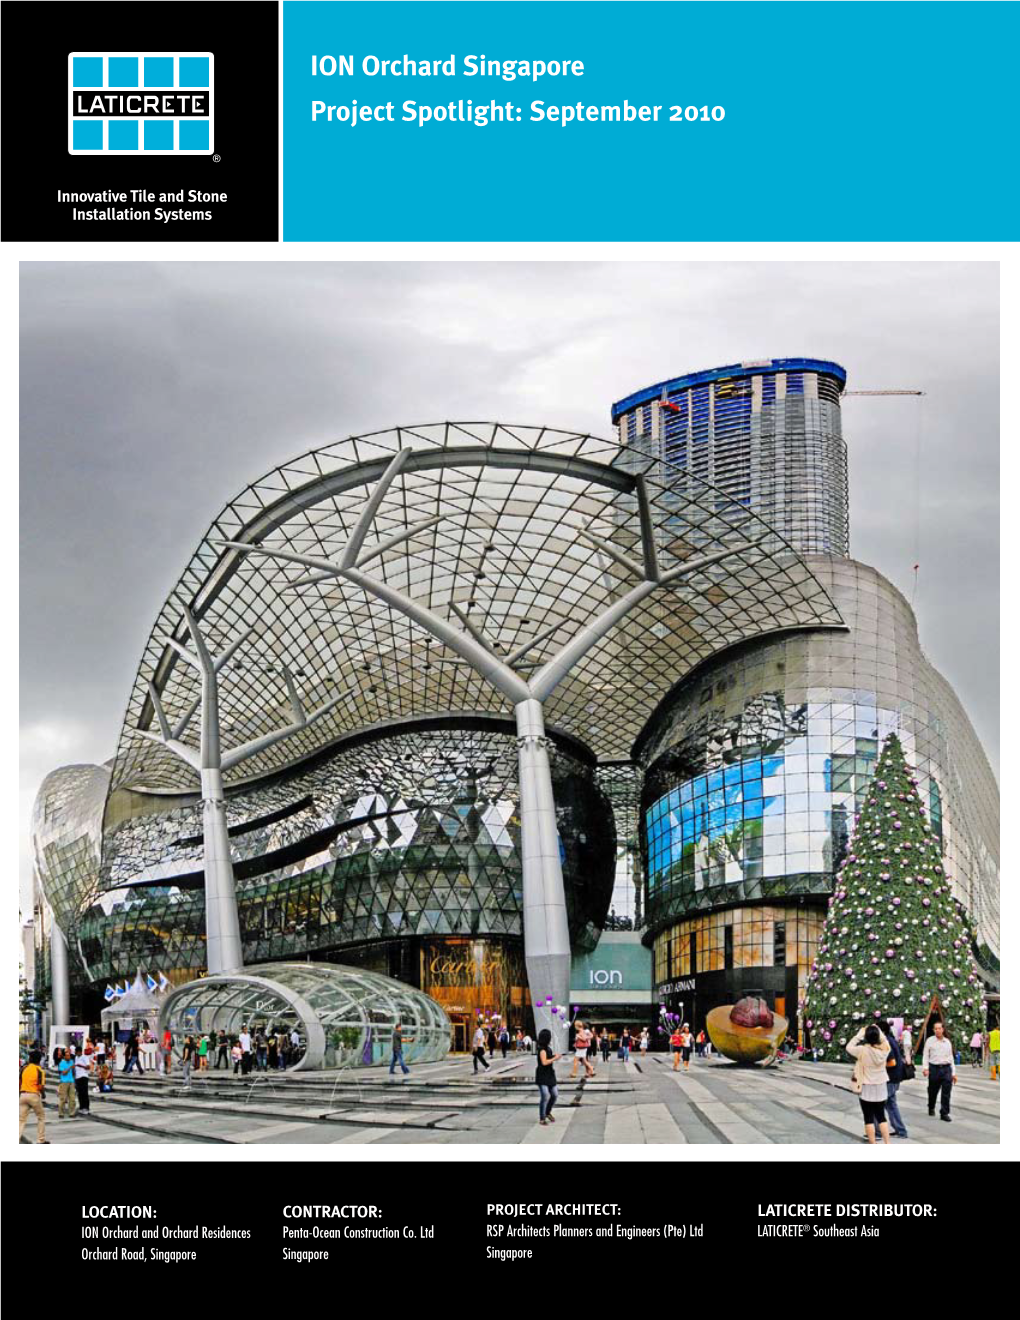 ION Orchard Singapore Project Spotlight: September 2010